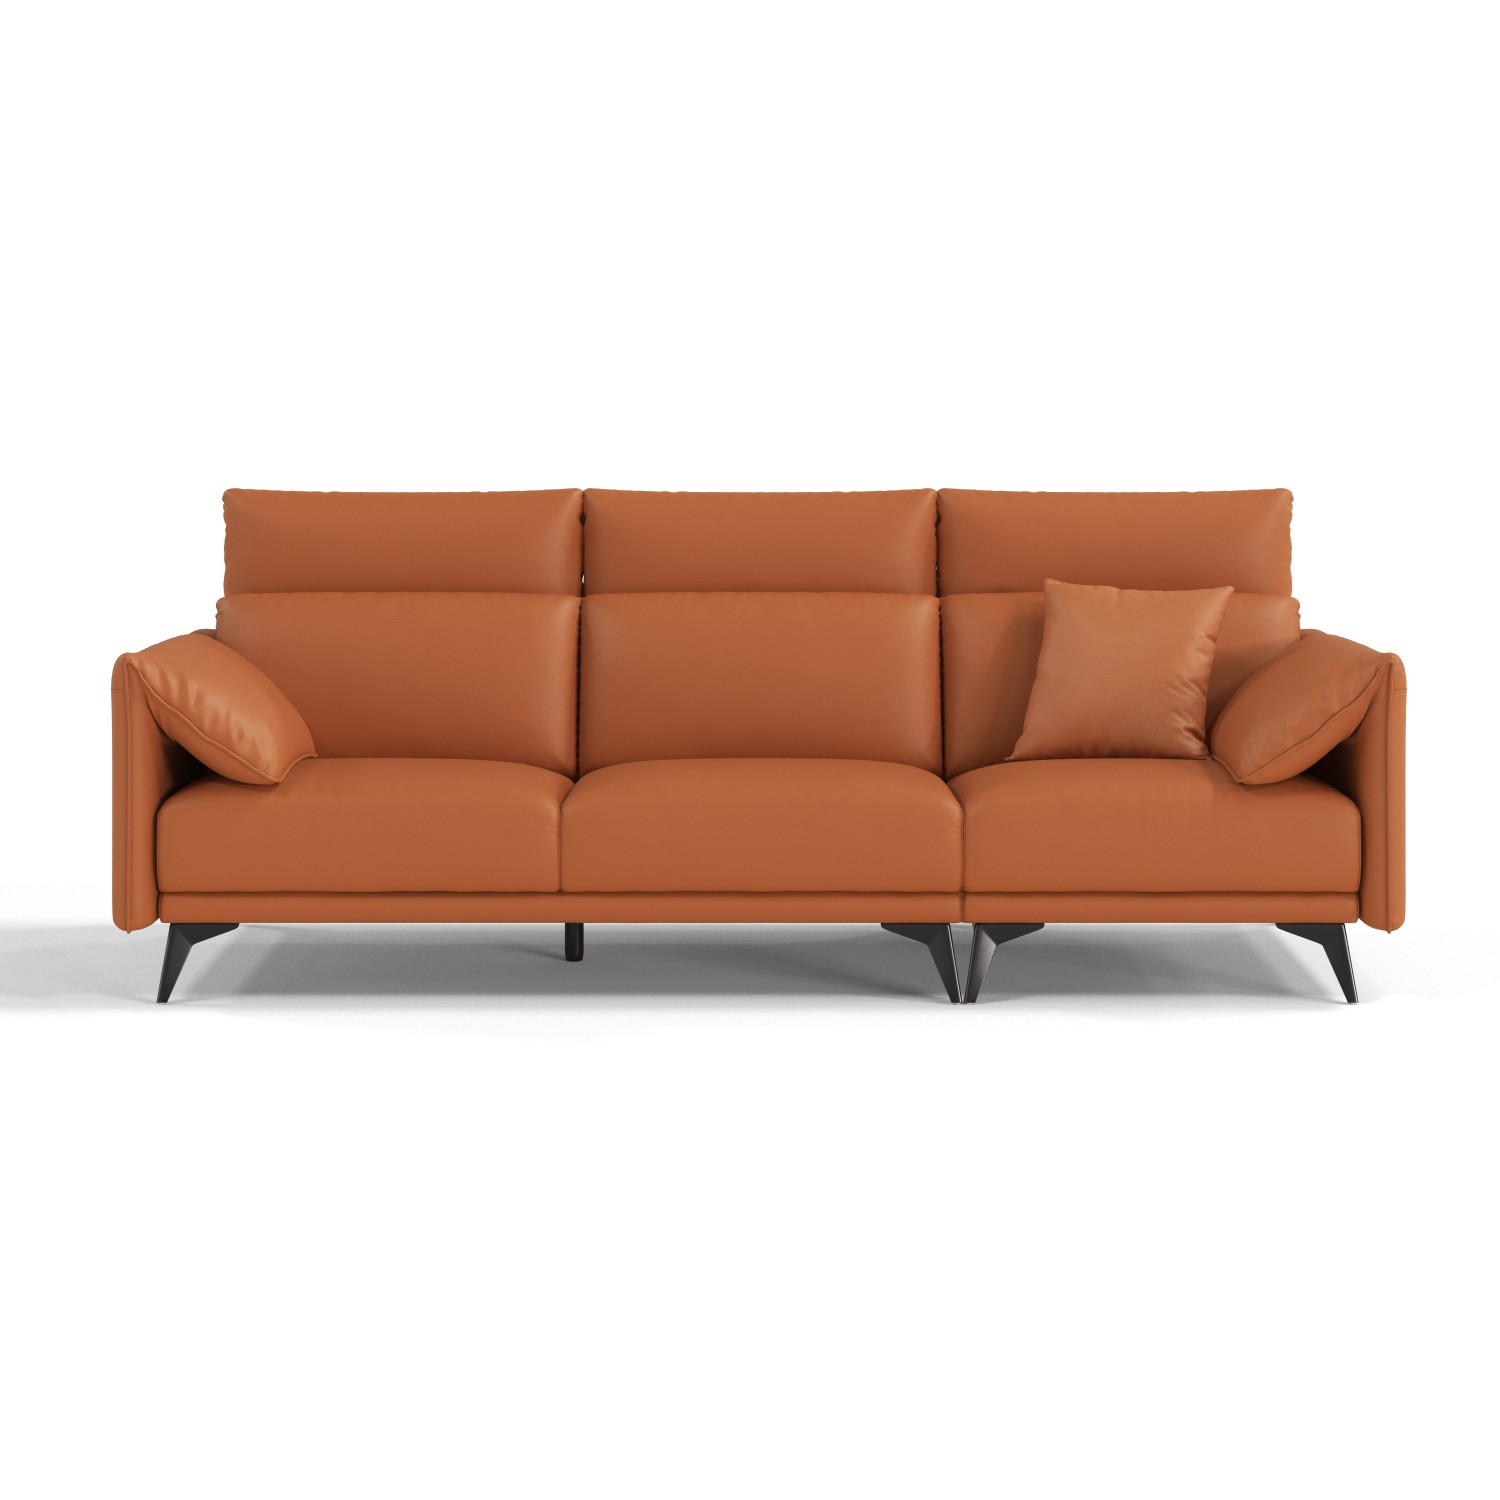 LINSY Venus Sectional Sofa 3 Seater| Vegan Leather | Cat Friendly Sectional